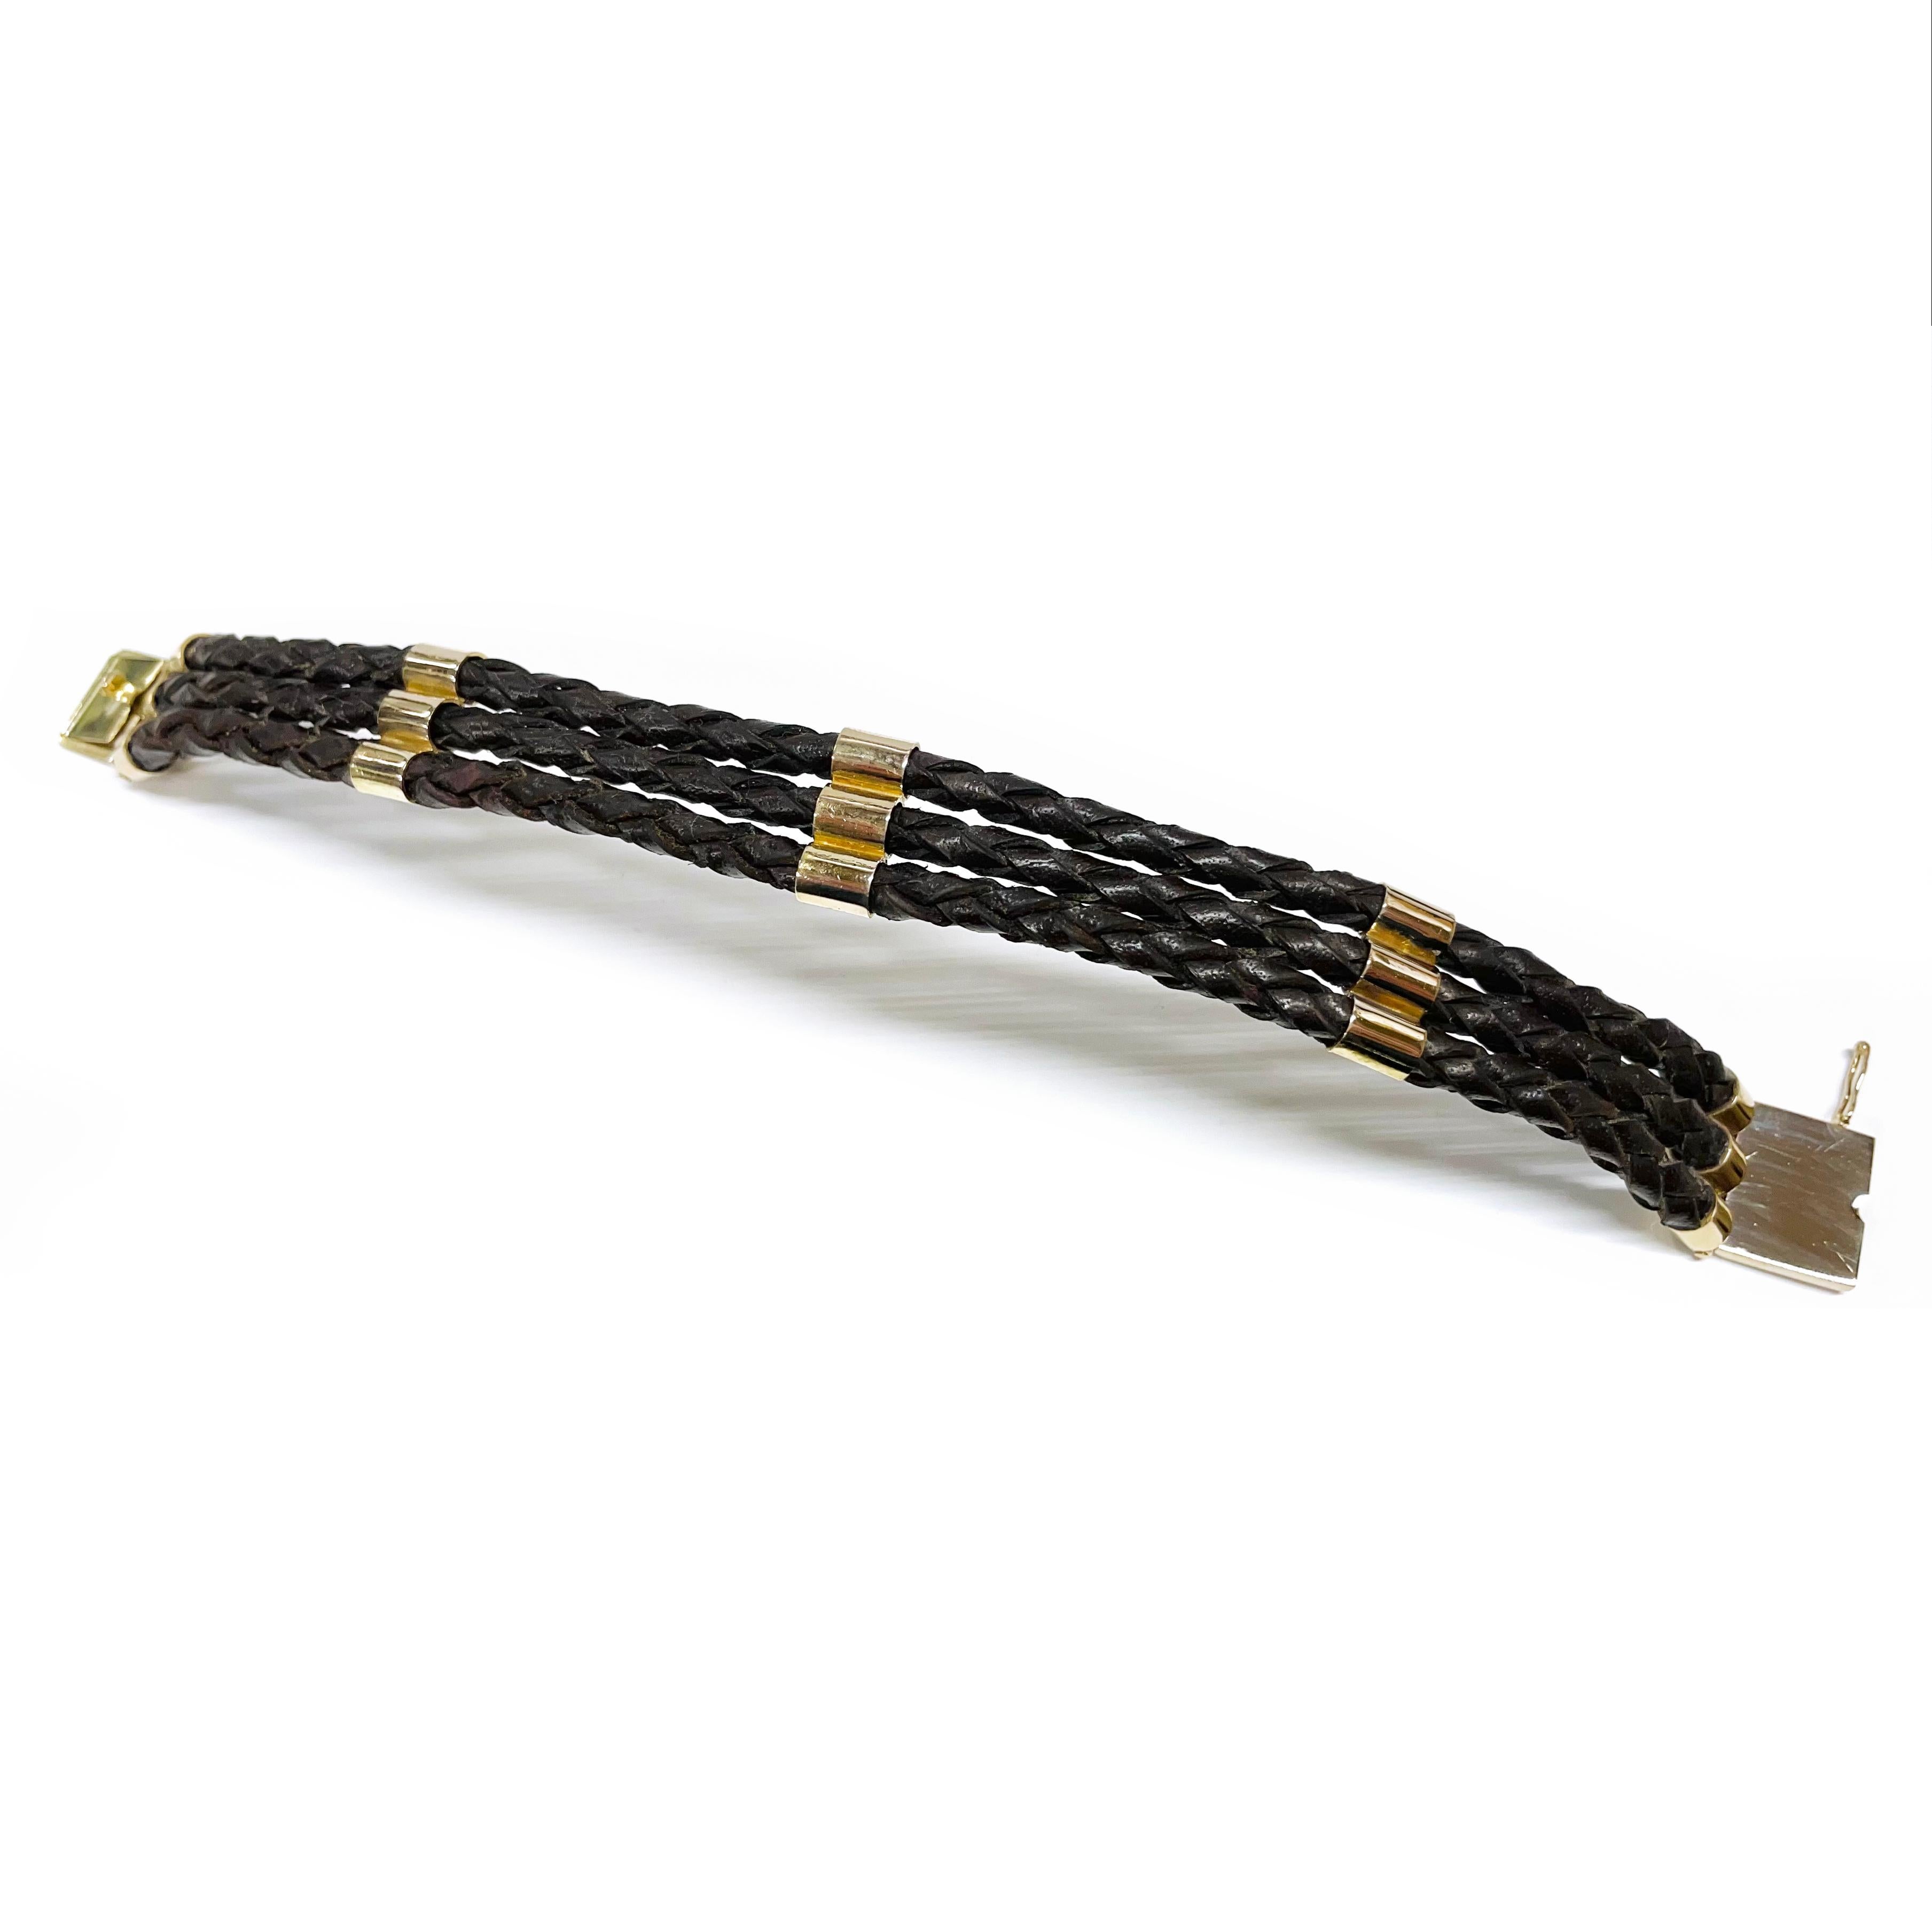 14 Karat Yellow Gold Braided Leather Three-Strand Bracelet. The handcrafted bracelet features three braided brown leather strands with three gold accents and gold accent ends with tongue and box clasp closure and a safety eight. Stamped on the